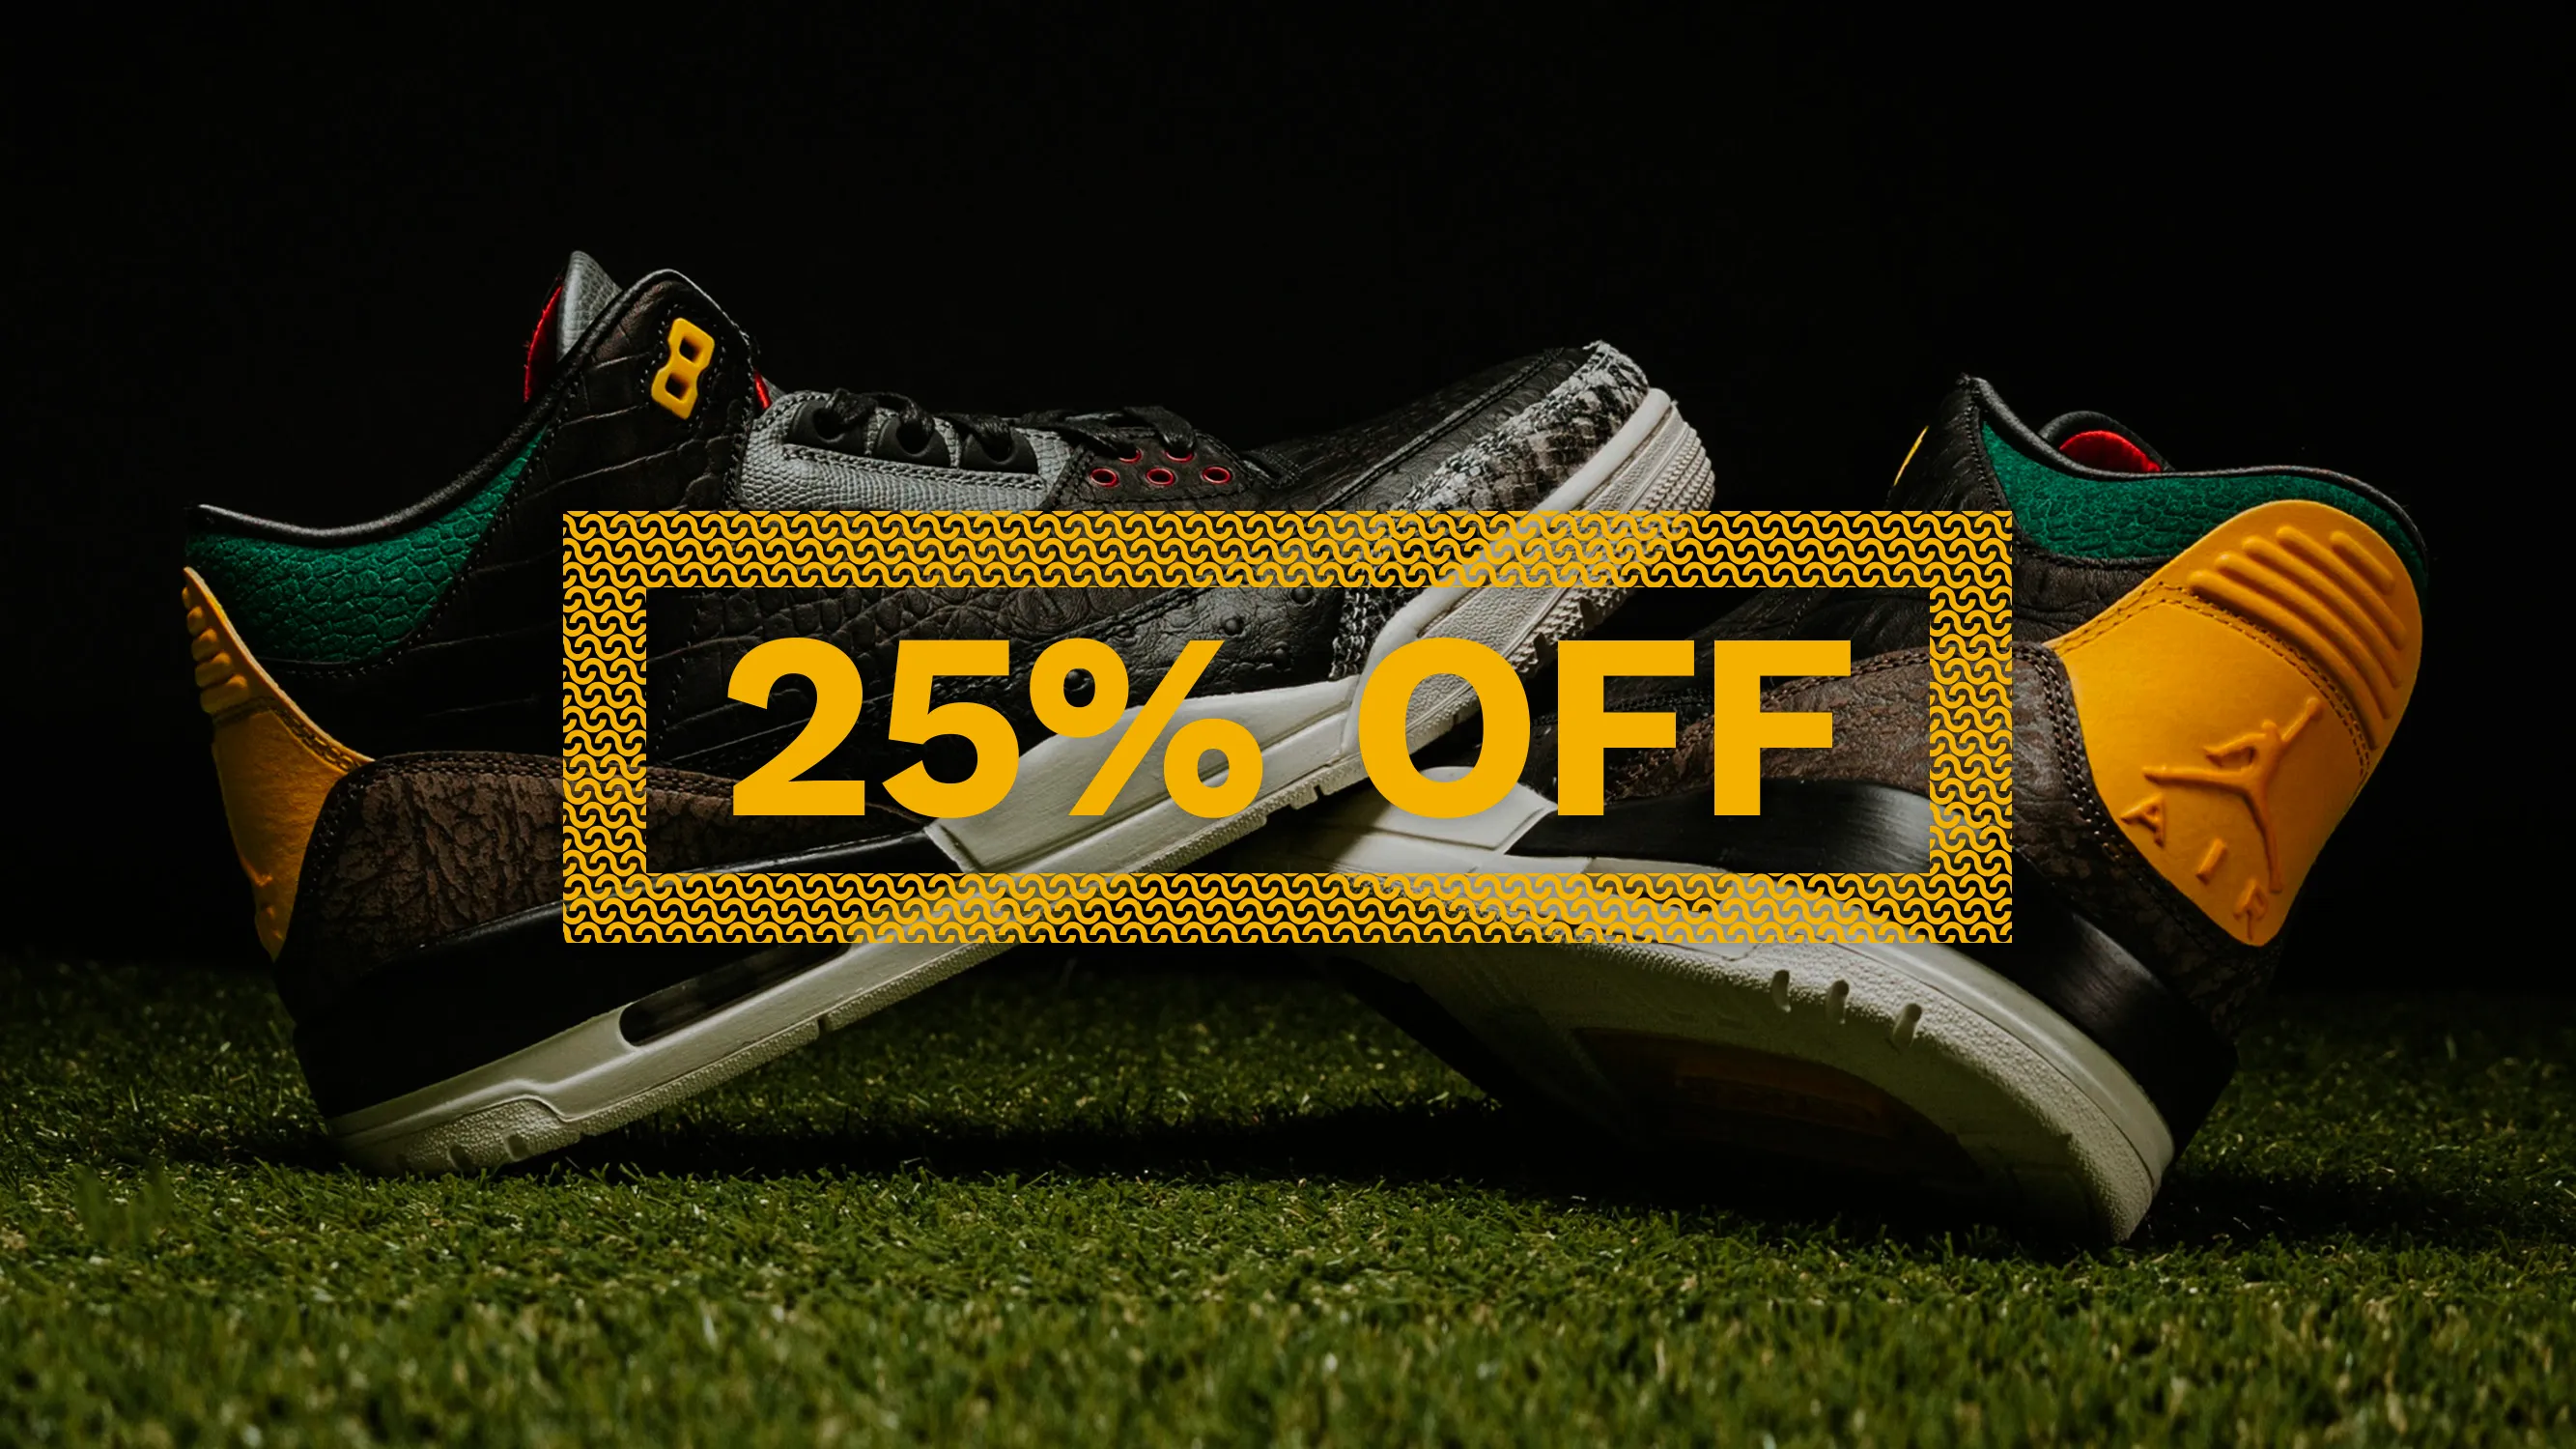 Buy 2 Sale Items & Get an Extra 25% Off With Sneakersnstuff's Unmissable Black Friday Deal